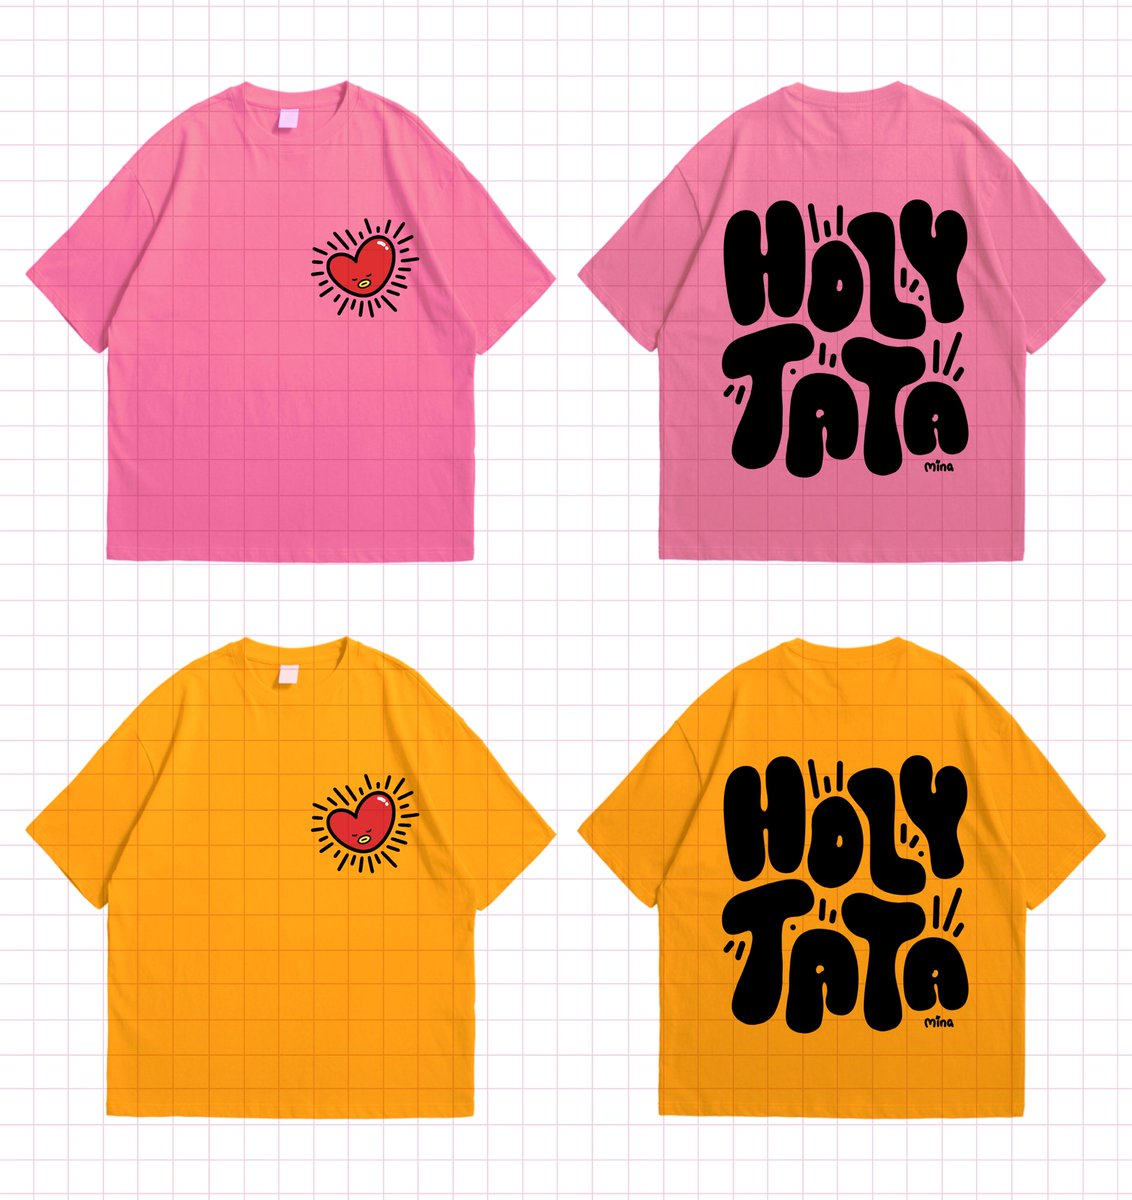 Is an oversize shirt btw 🩷🧡 I’ll have it in 2 colors on my next shop update: May 1 ✨ I’ll put info details in my platform this week 🥰 + sp0ilers, I will have other clothing items available on this update too! But those will be shown next week 🥰 I want to take better pics